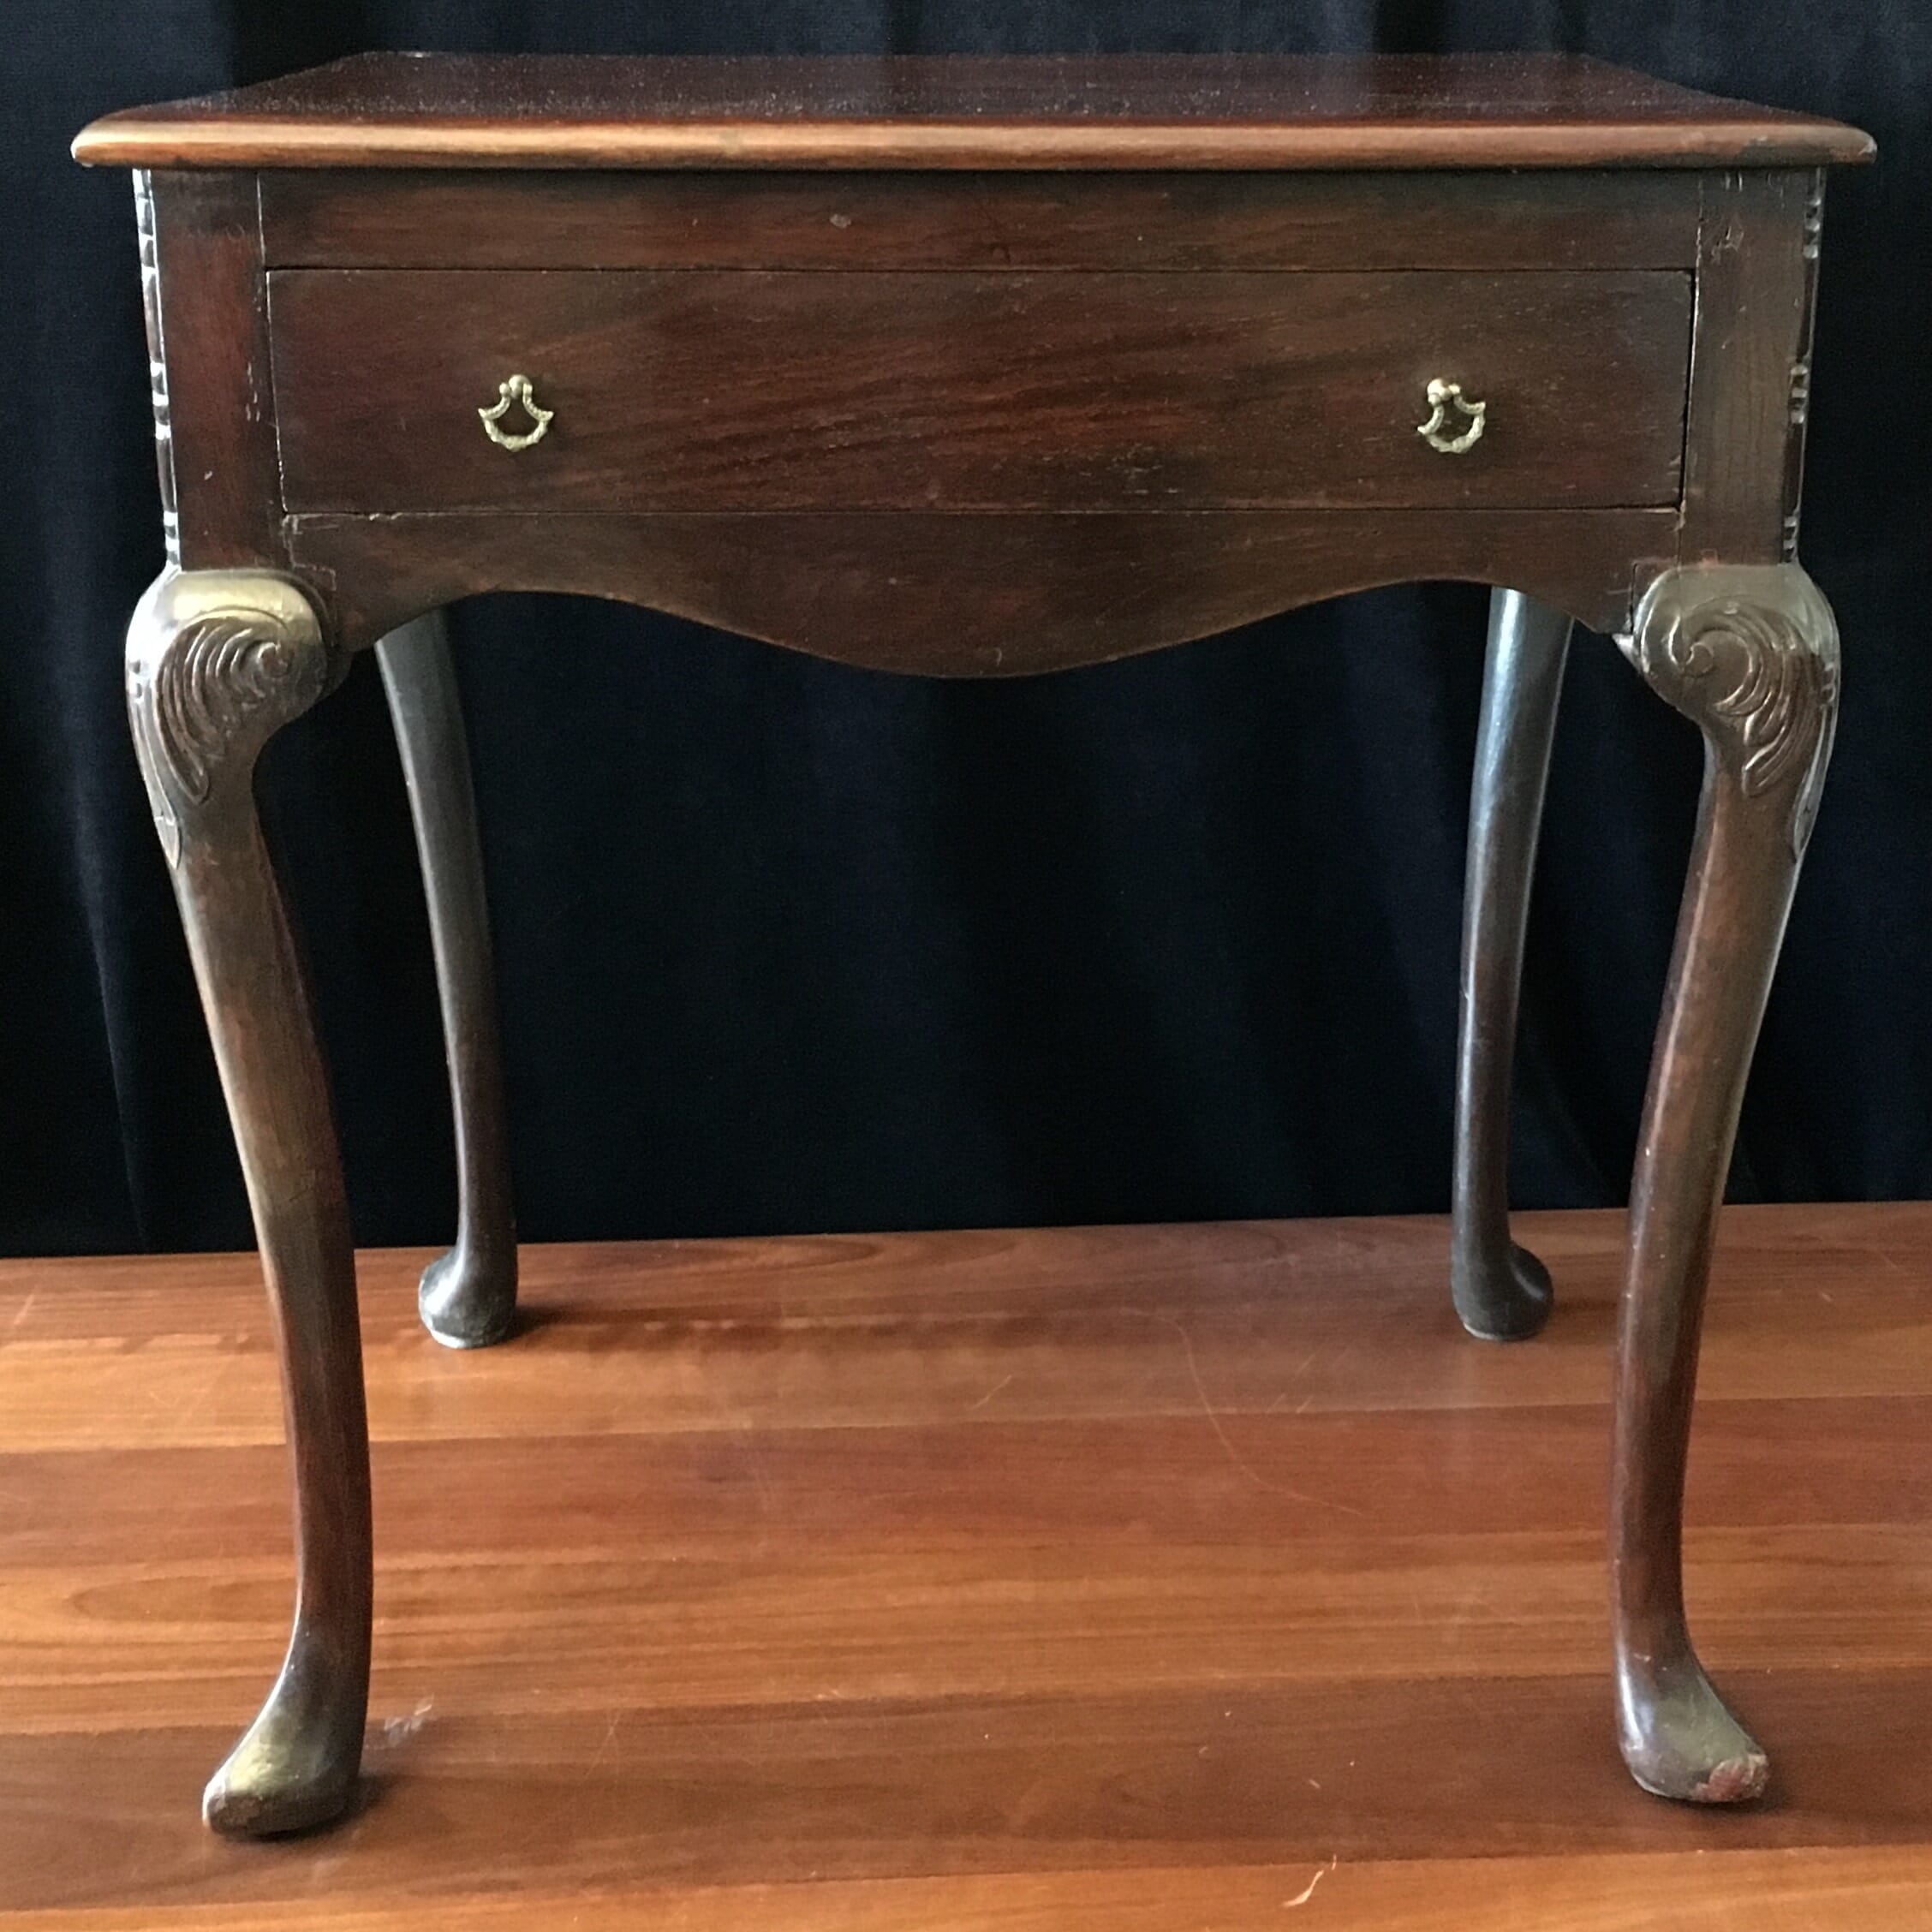 18th C English oak side table with draw to the front with elegant carved legs and later modifications -0